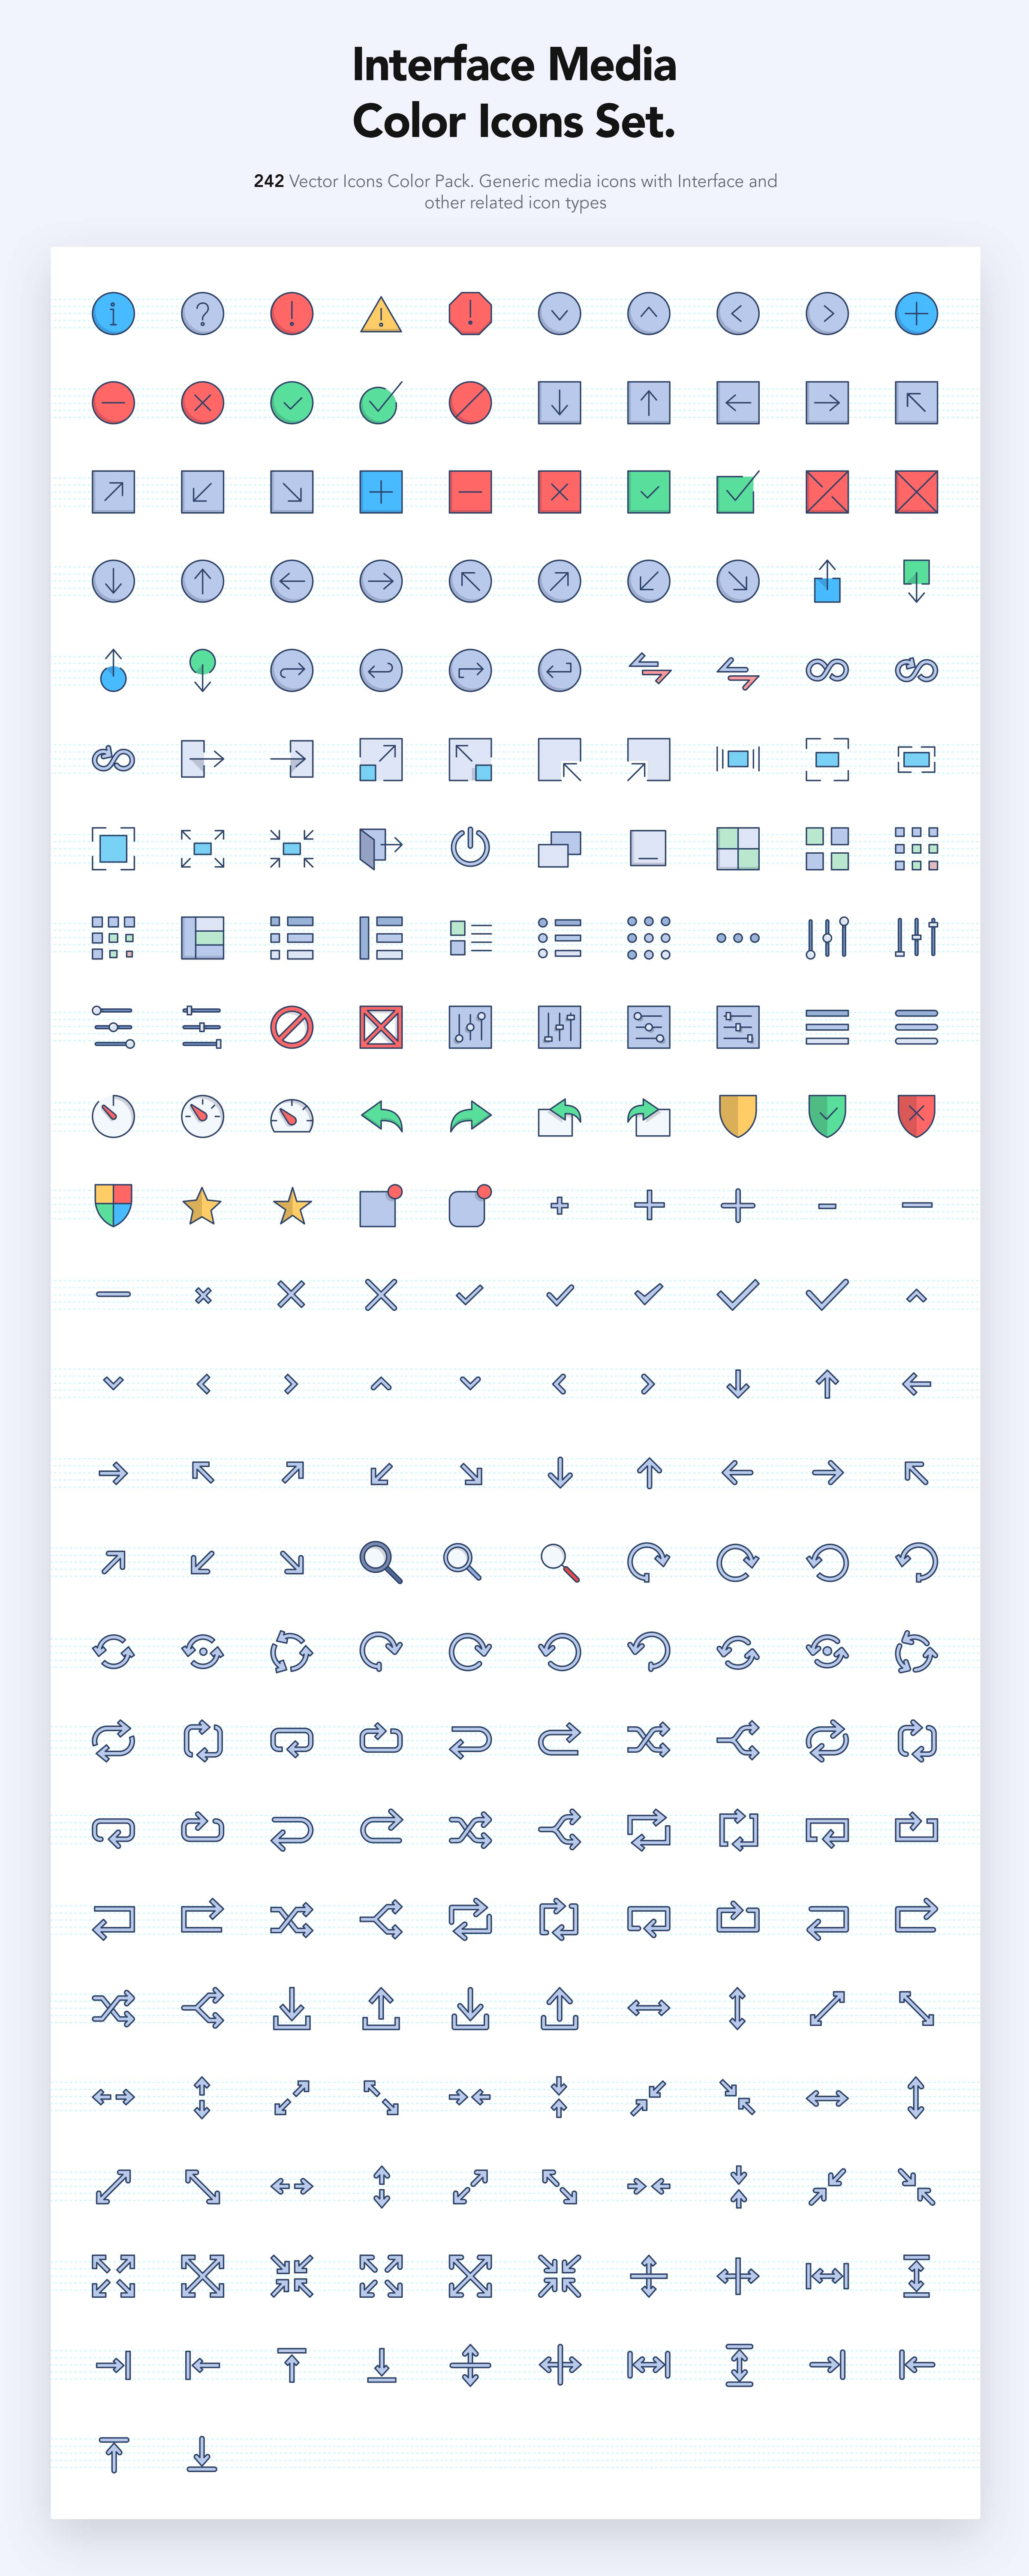 Icons of products categories white and color Vector Image